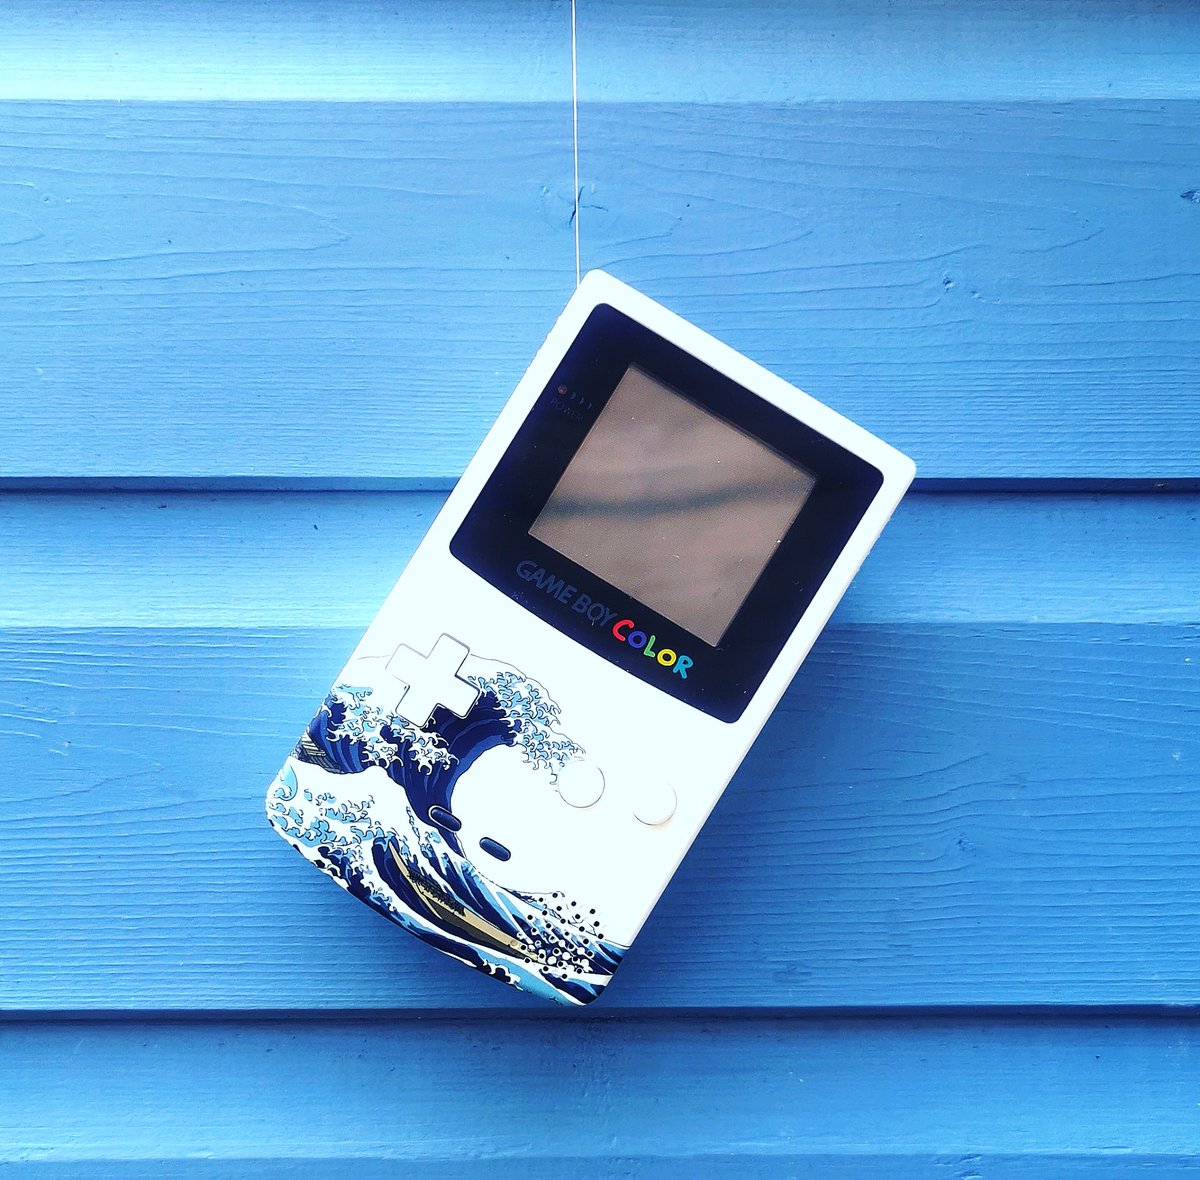 The Great Wave Off Kanagawa.

Gameboy colour shell from @ExtremeRate

Enjoy your gaming 🎮.

#gameboycolor #nintendogameboy #gbc #gameboy #gameboylife #customgameboy #gameboyshell #retrogamer #retrogaming #retrogames #gaming #gamer #thegreatwave #extremerate #gameboycolour